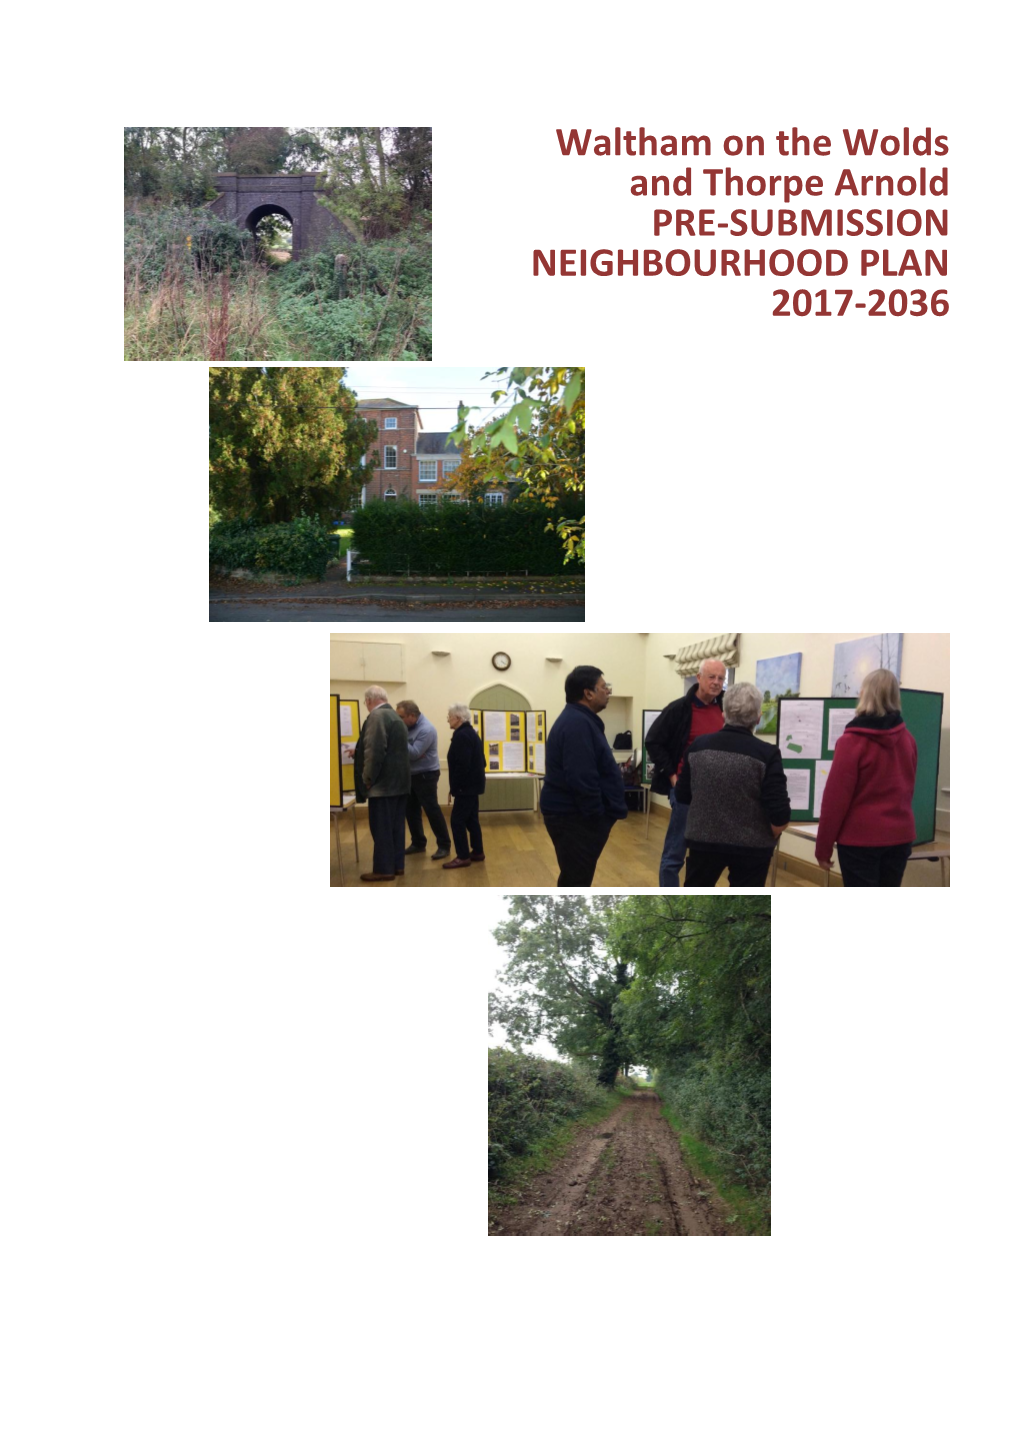 Waltham on the Wolds and Thorpe Arnold PRE-SUBMISSION NEIGHBOURHOOD PLAN 2017-2036